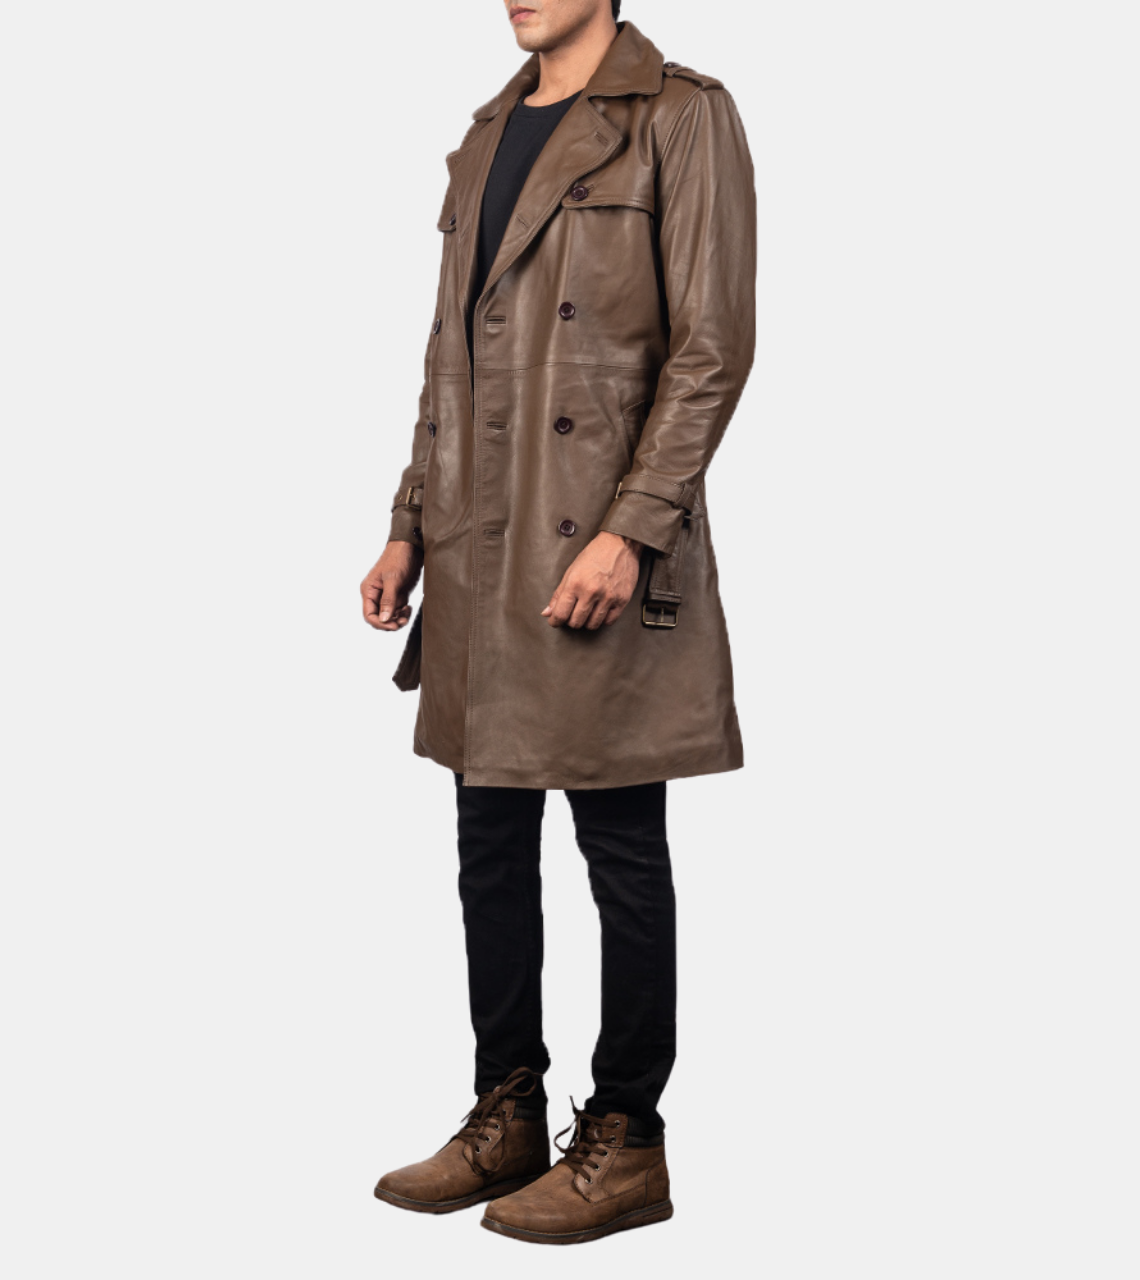  Men's Brown Notched Leather Coat 